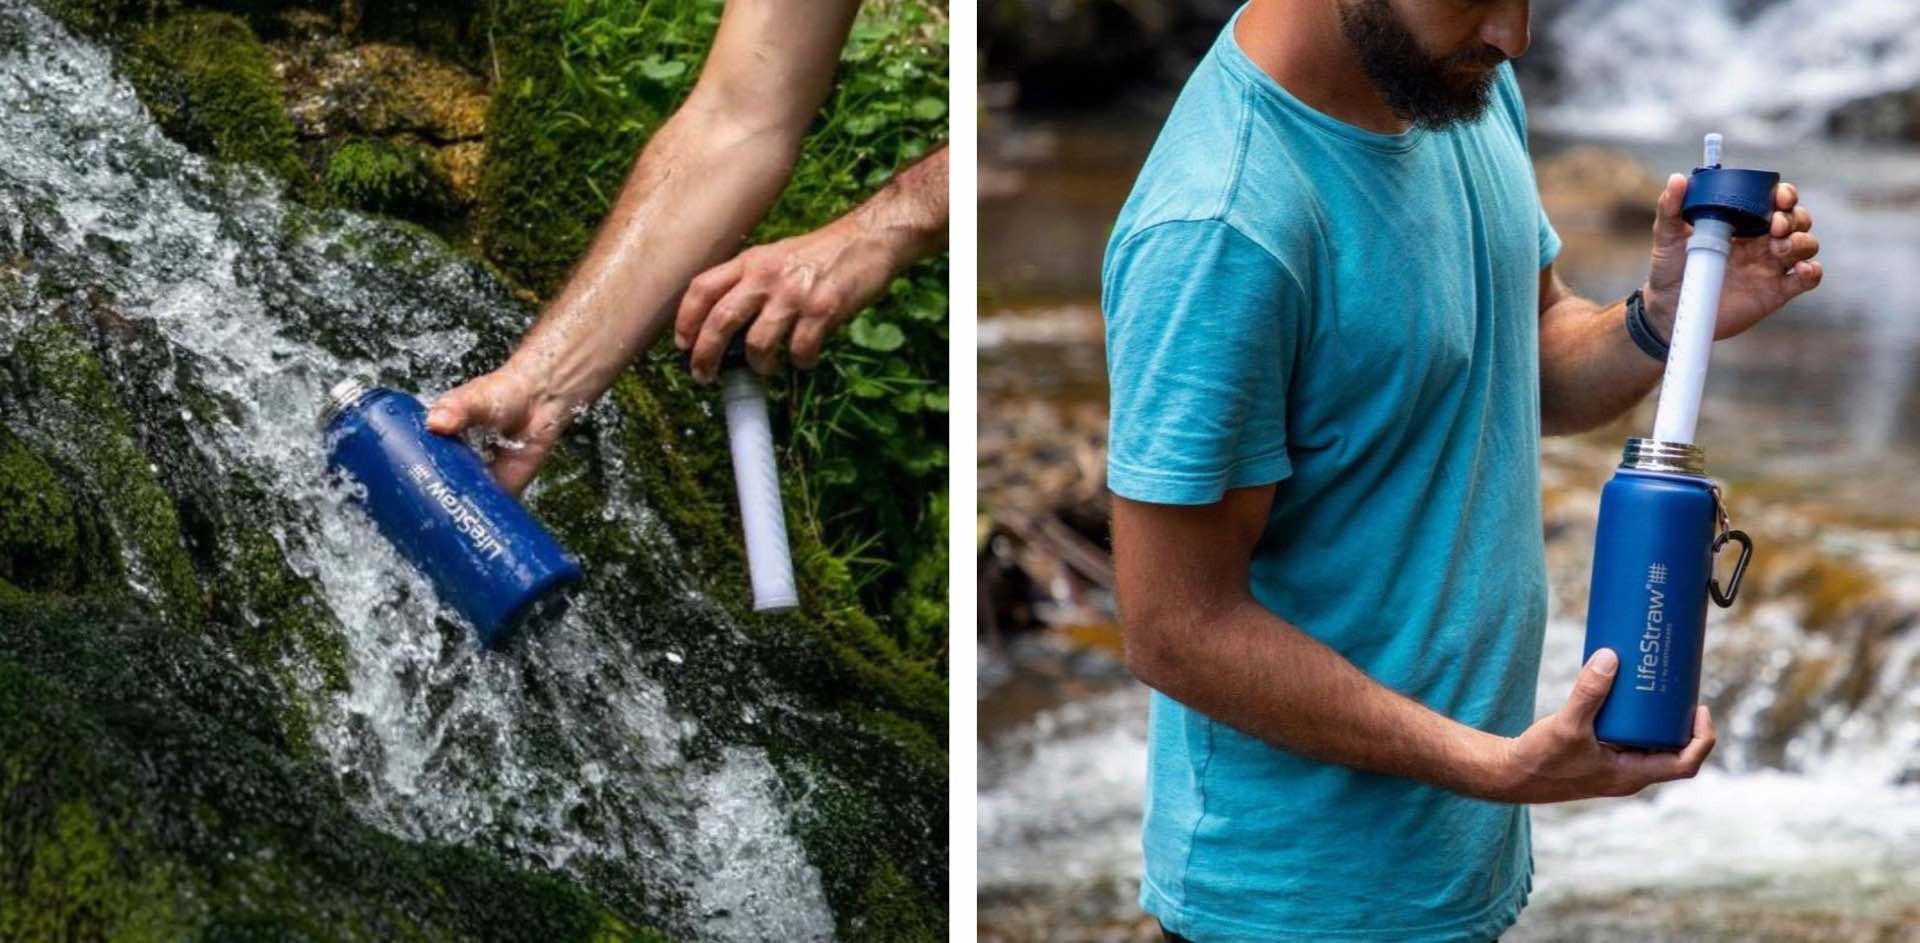 The Lifestraw Go stainless steel water bottle with filter. ($45)